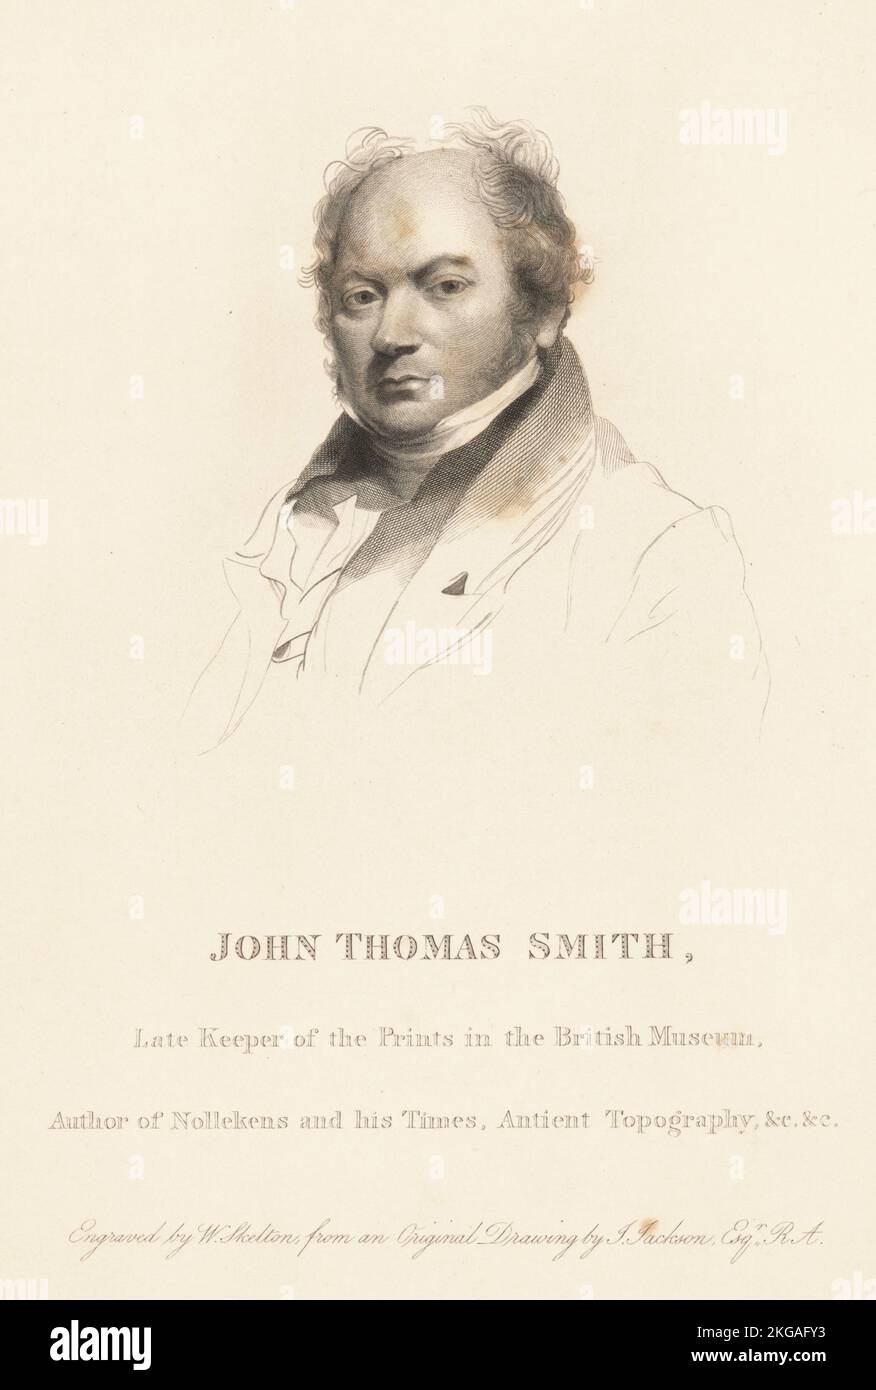 John Thomas Smith, late Keeper of the Prints in the British Museum, author of Vagabondia, Nollekens and His Times, Antient Topography, 1766-1833. Copperplate engraving by William Skelton after a portrait by John Jackson from John Thomas Smith's The Cries of London, or Vagabondiana 2, edited by Francis Douce, John Bowyer Nichols, London, 1839. Stock Photo